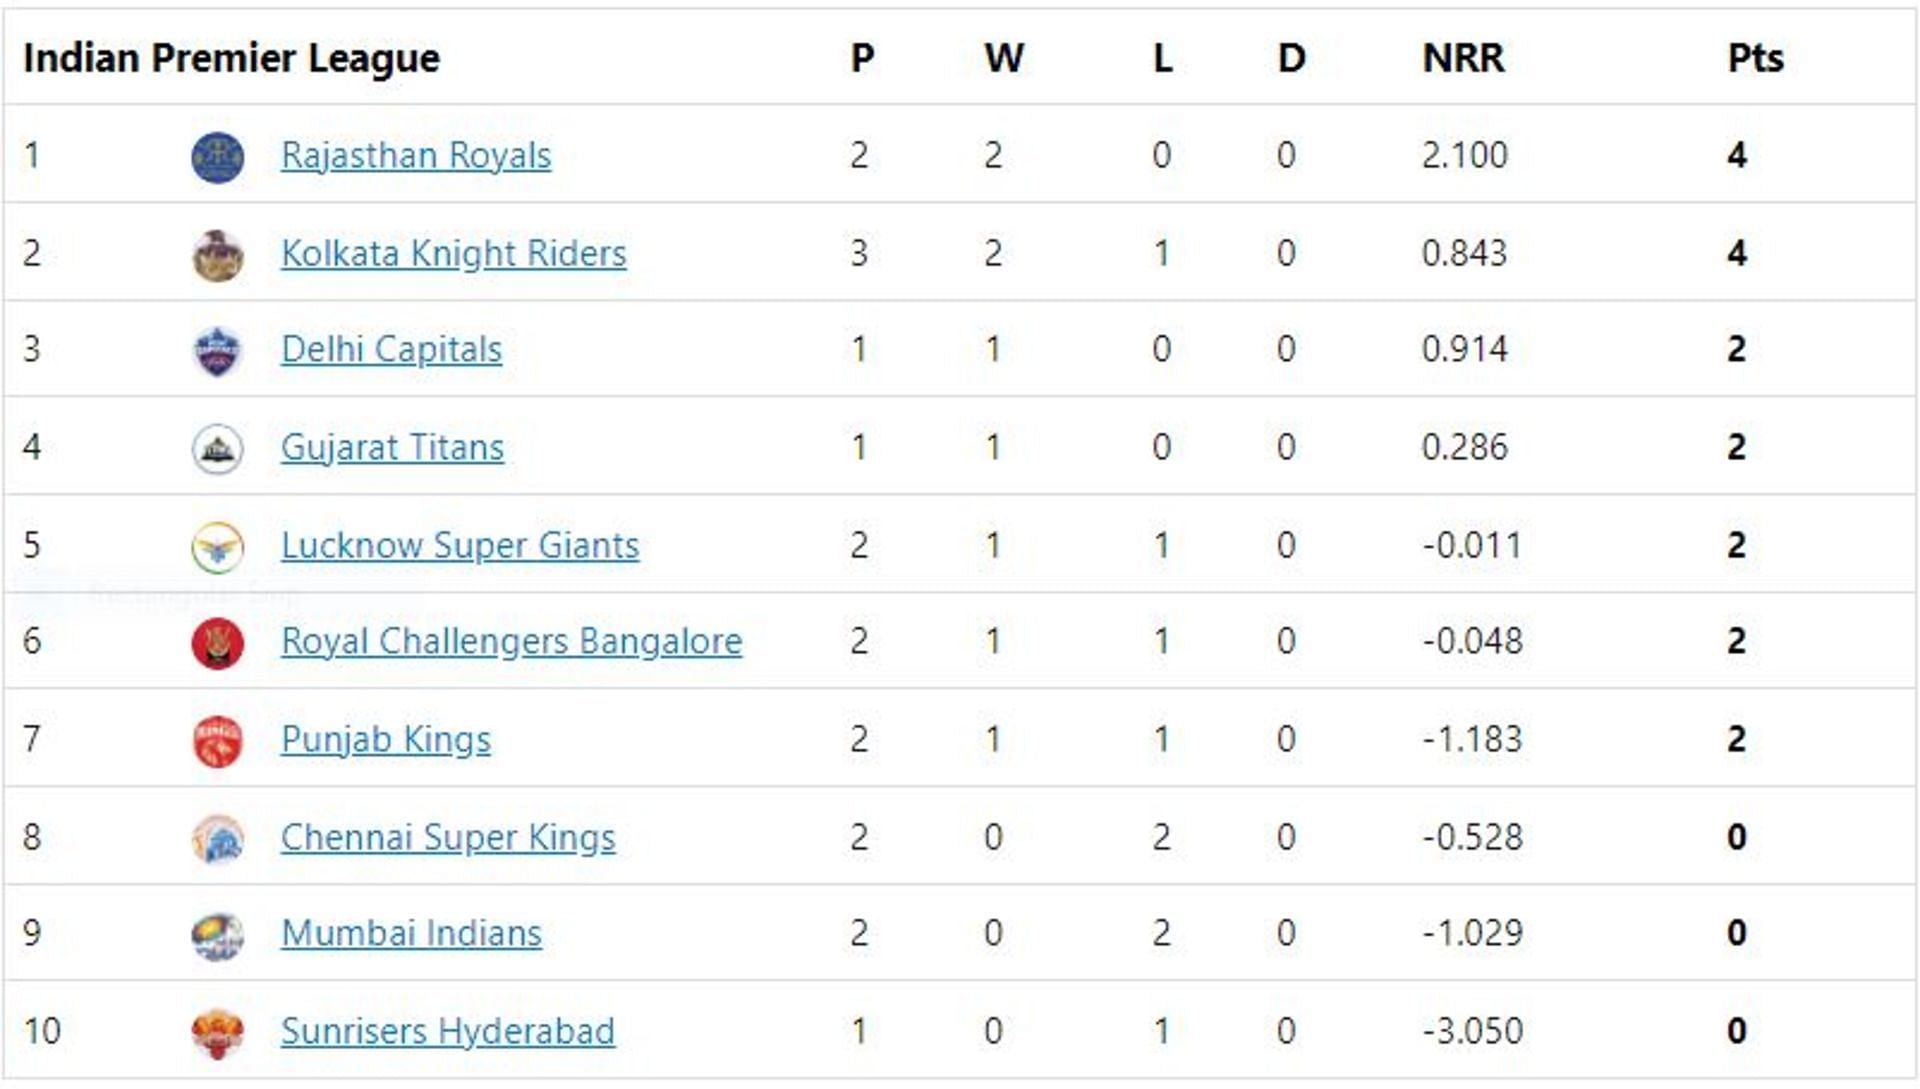 RR claim the first position in the points table.